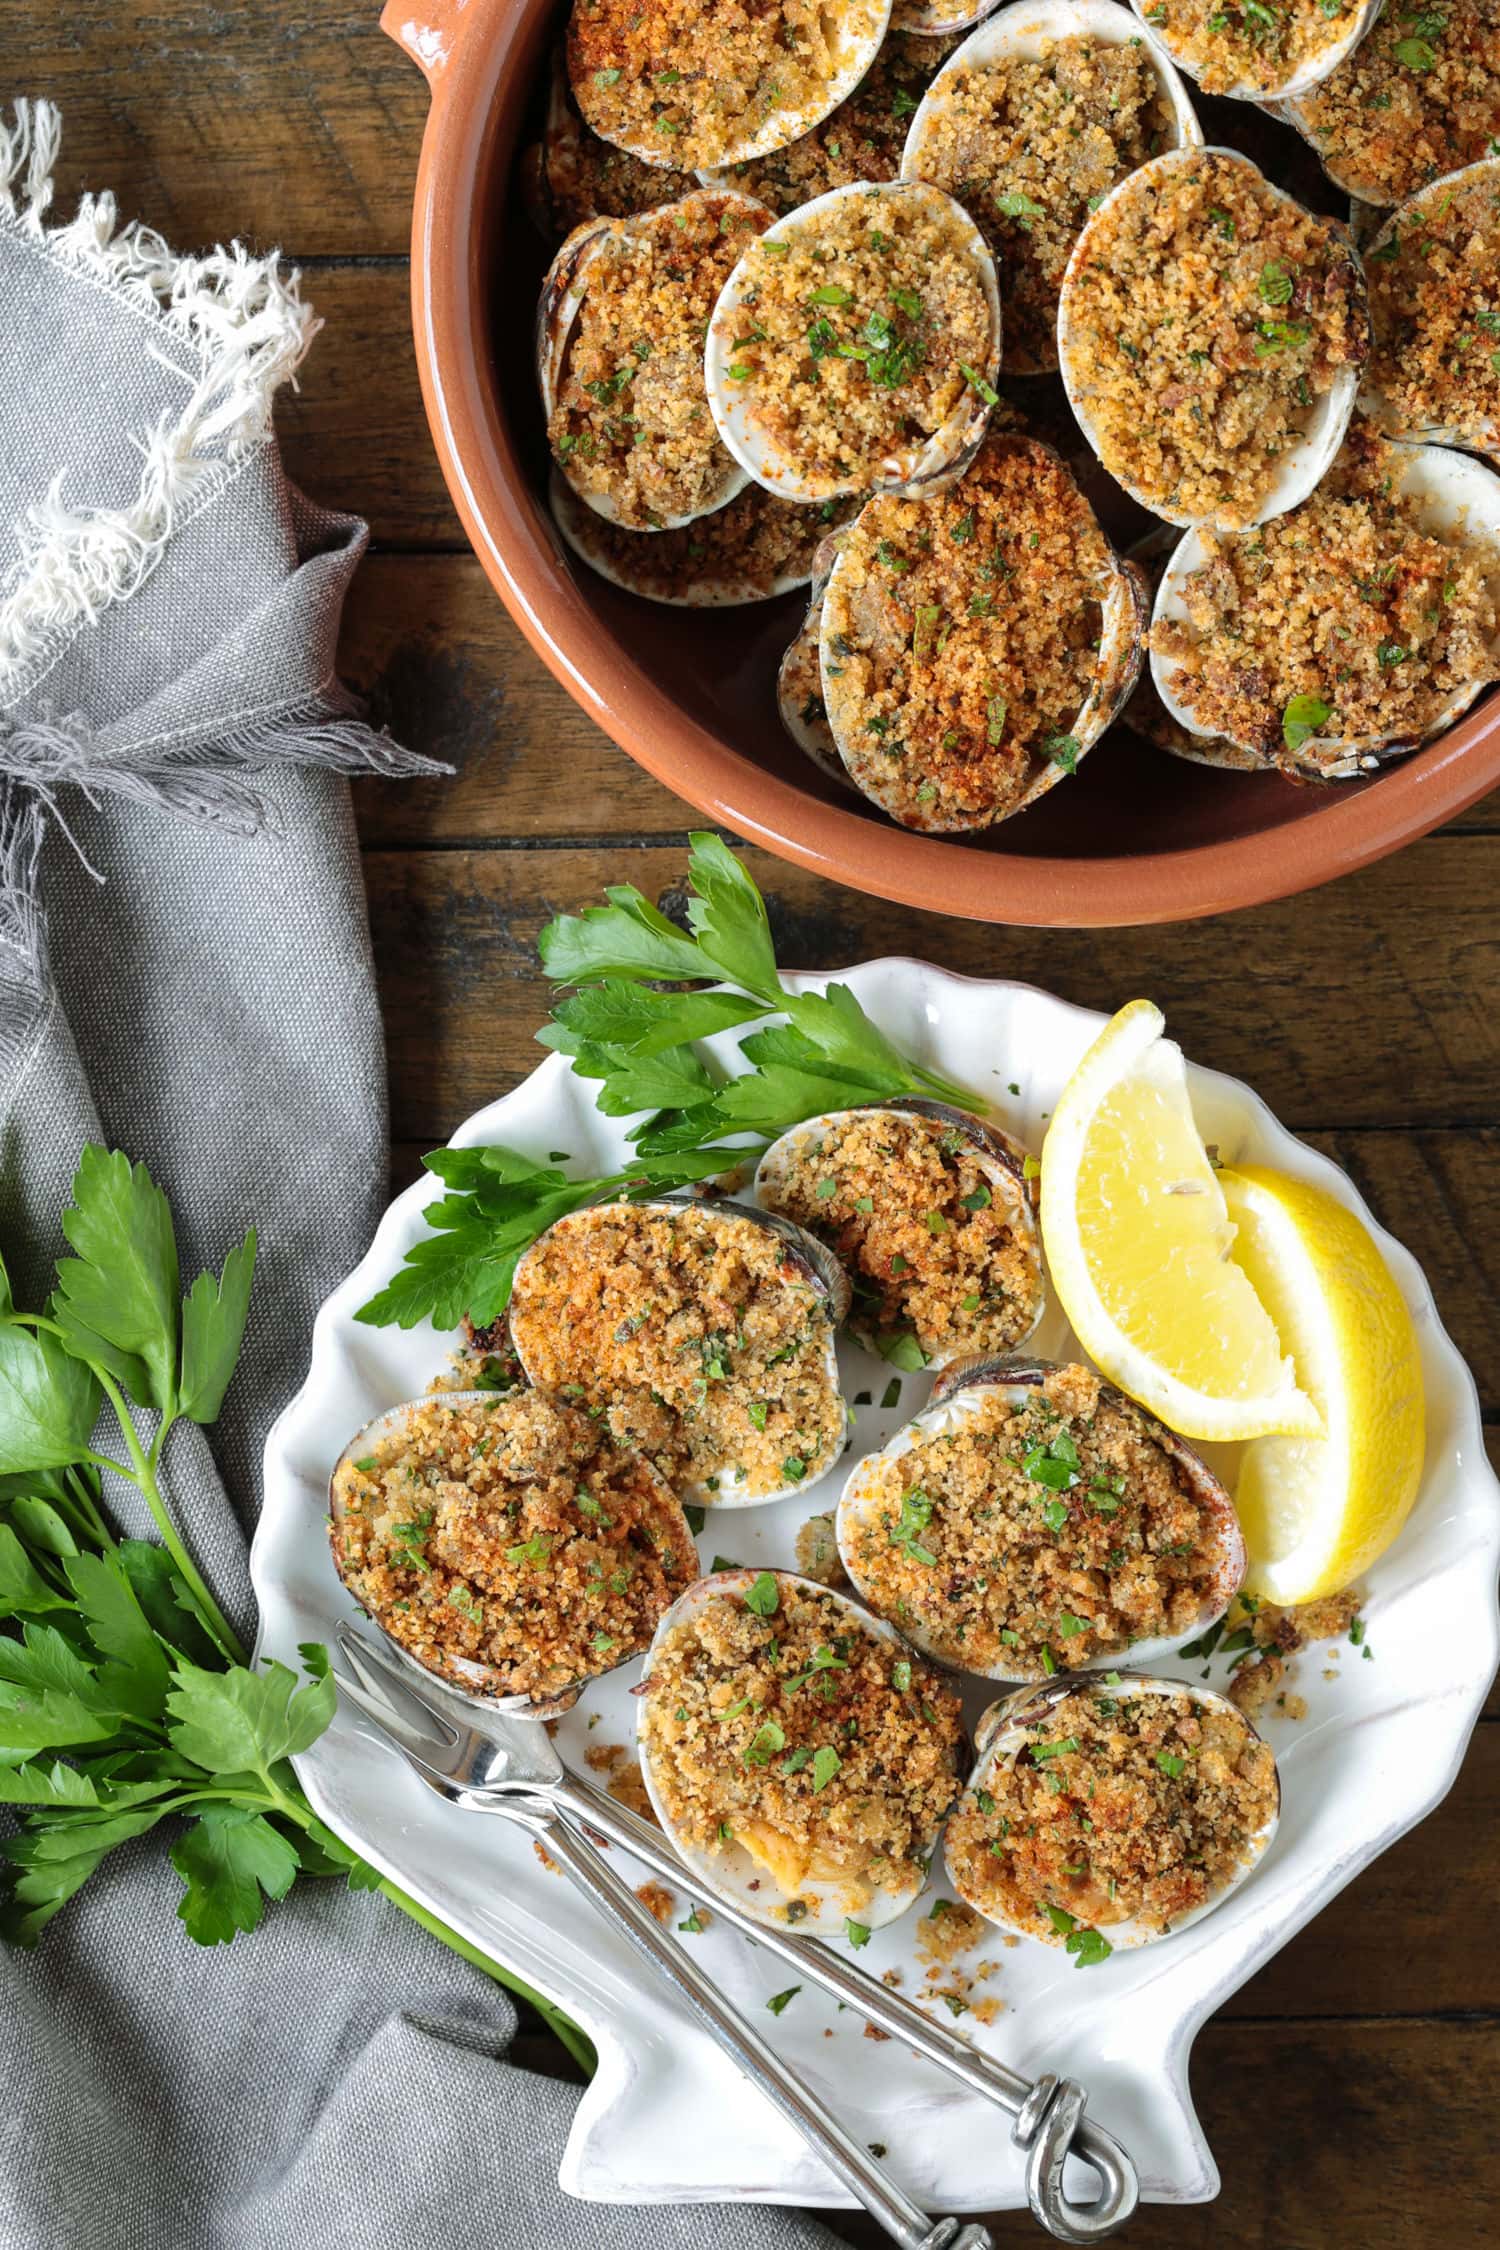 baked clams in shell dish with clams on the side